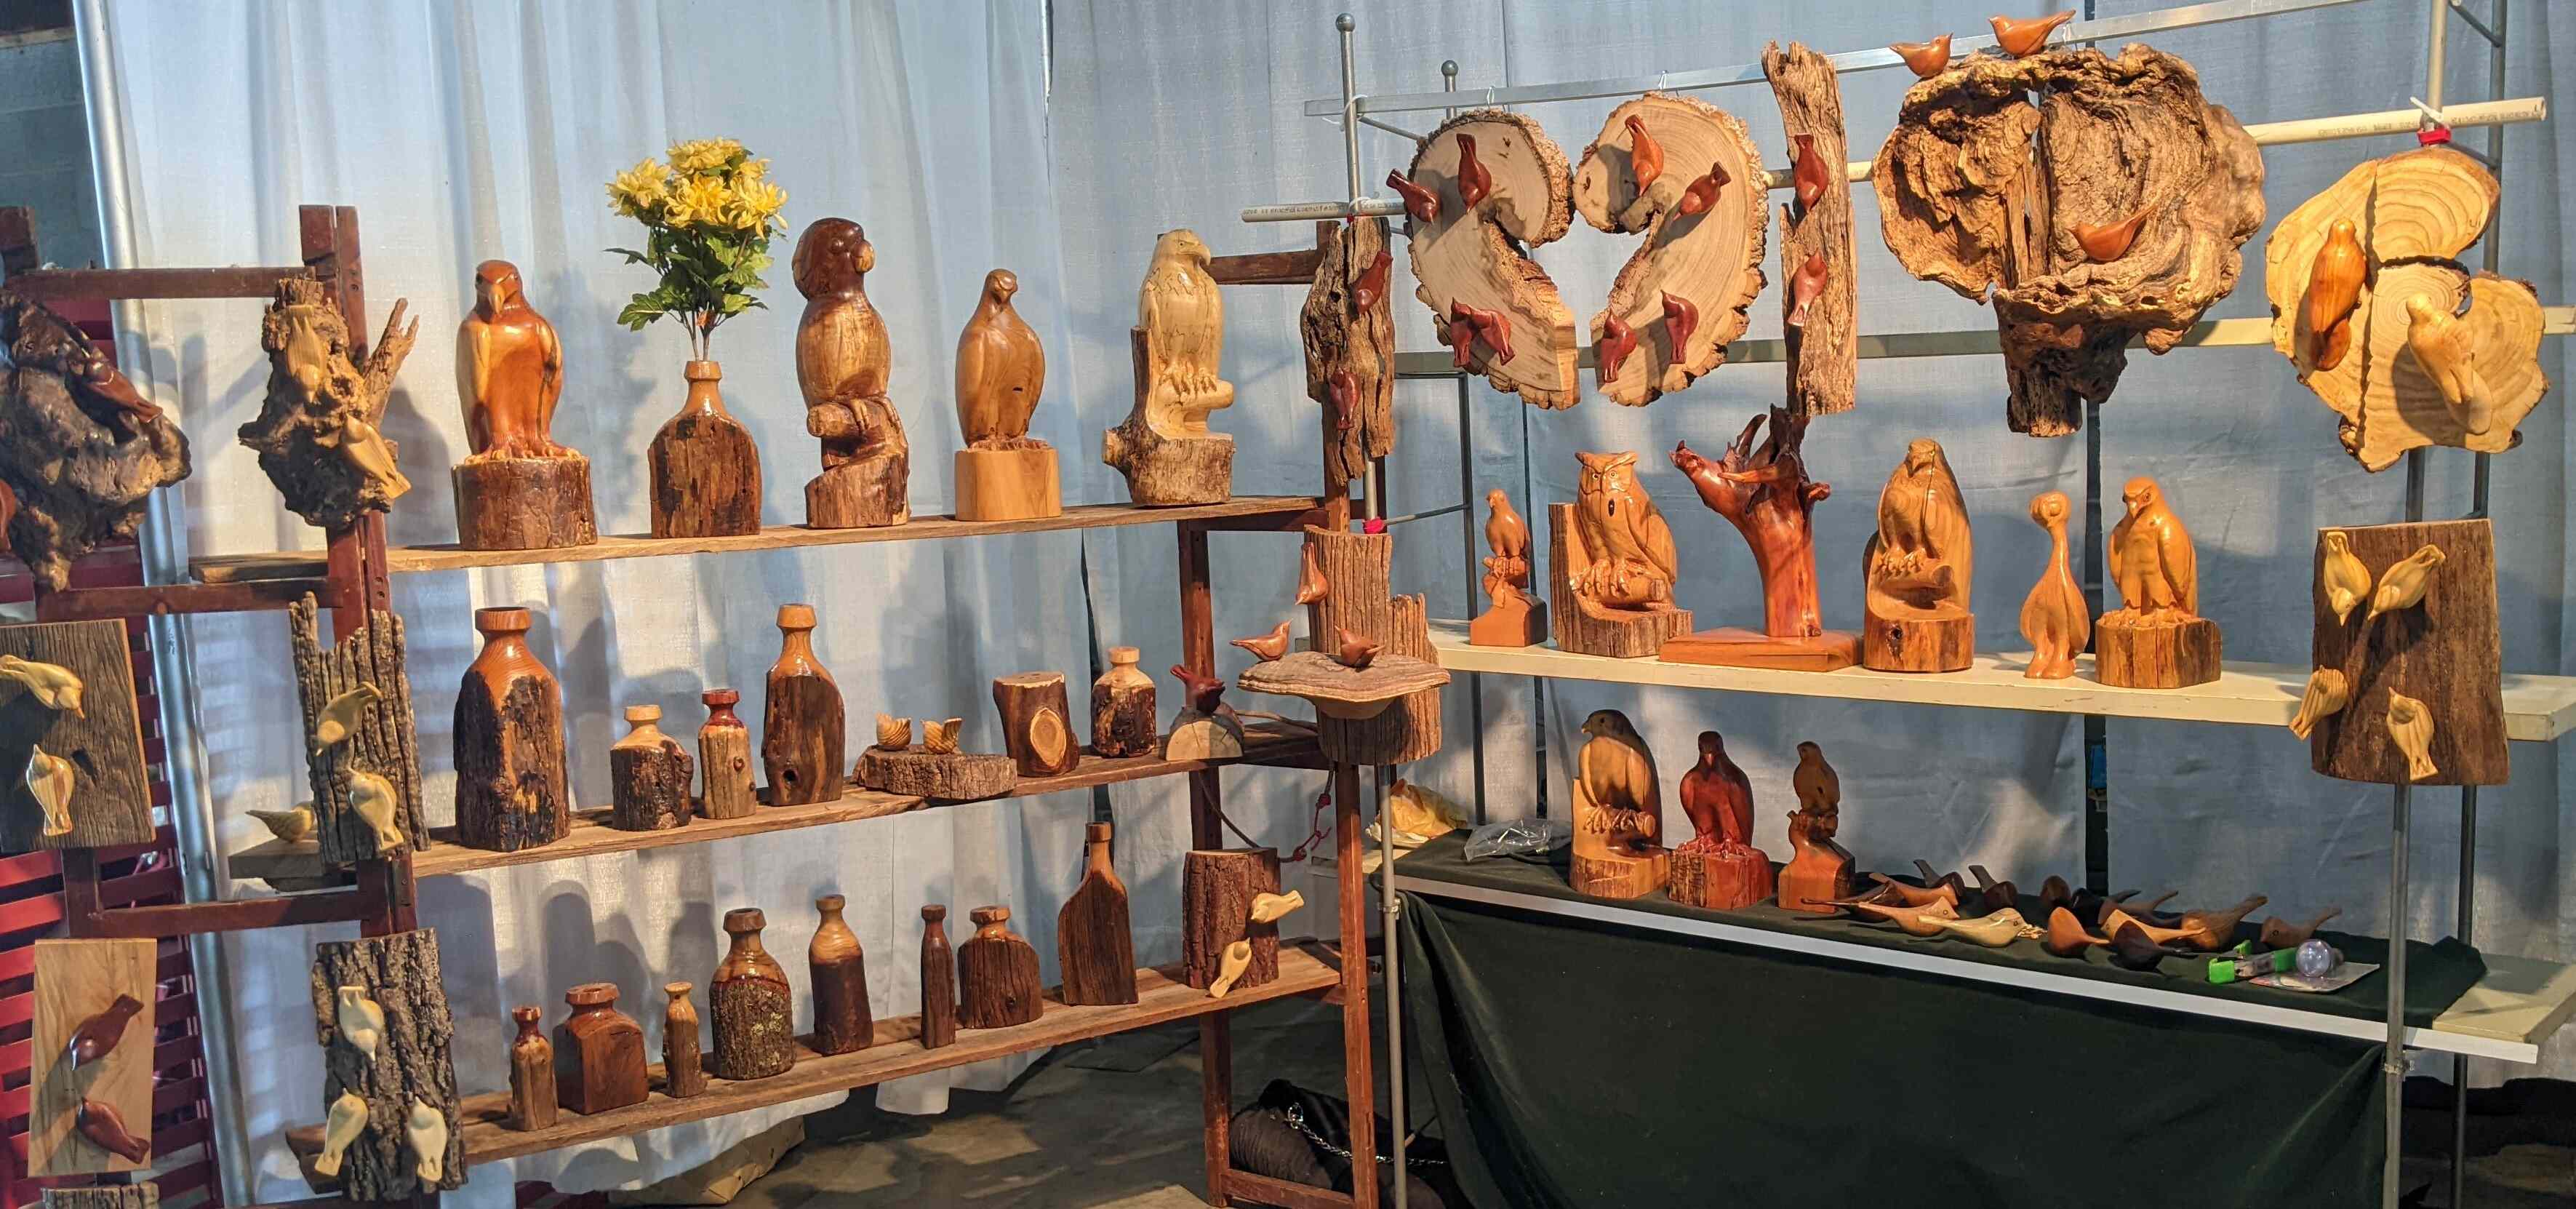 photograph of a display of stylized wood carvings of various birds, dry vases and wall hangings by gary carver of carverscarvings